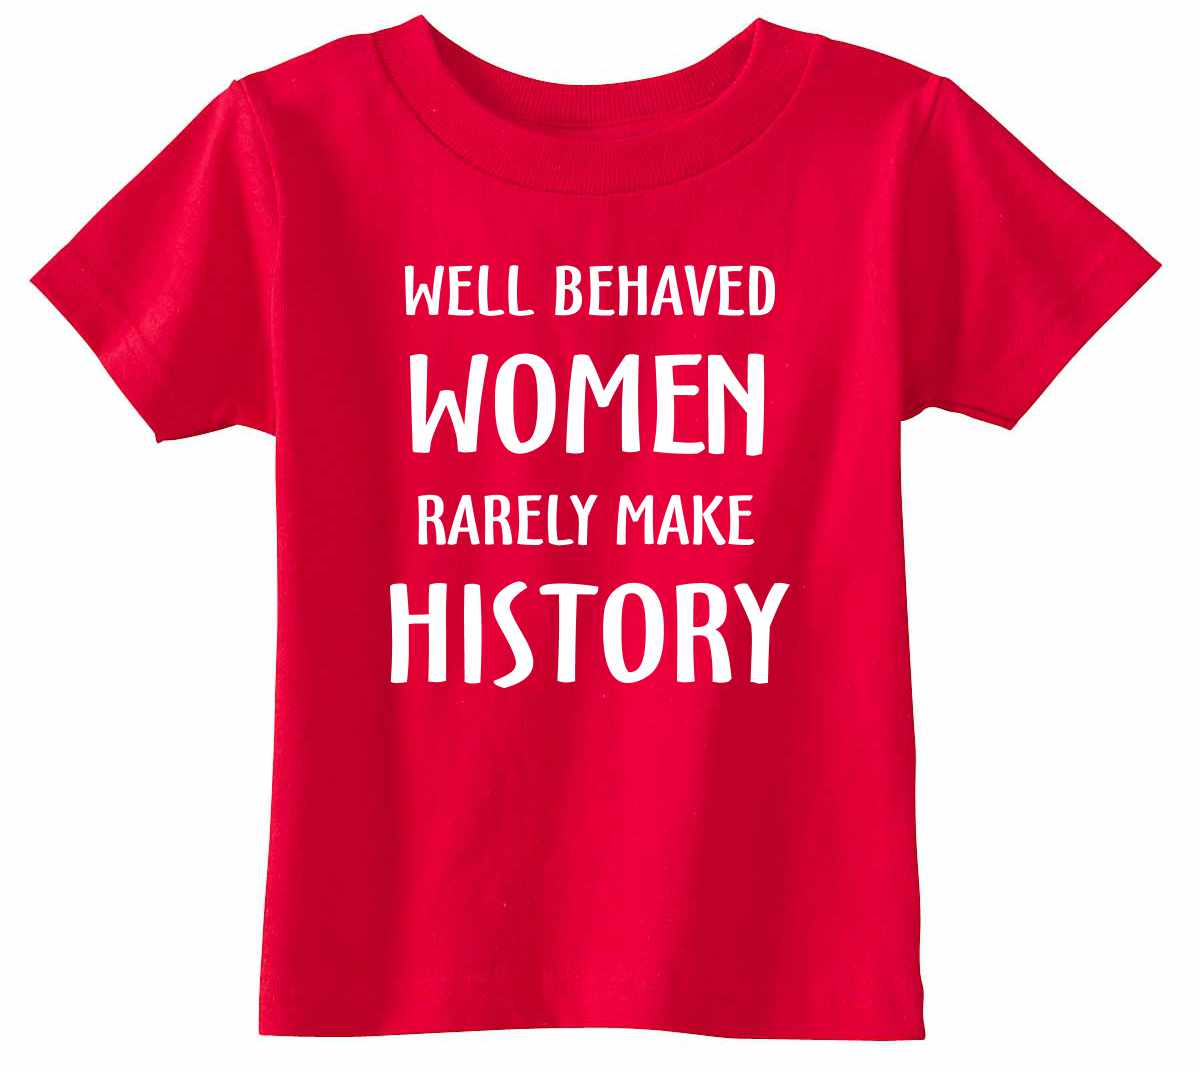 WELL BEHAVED WOMEN RARELY MAKE HISTORY Infant/Toddler  (#332-7)